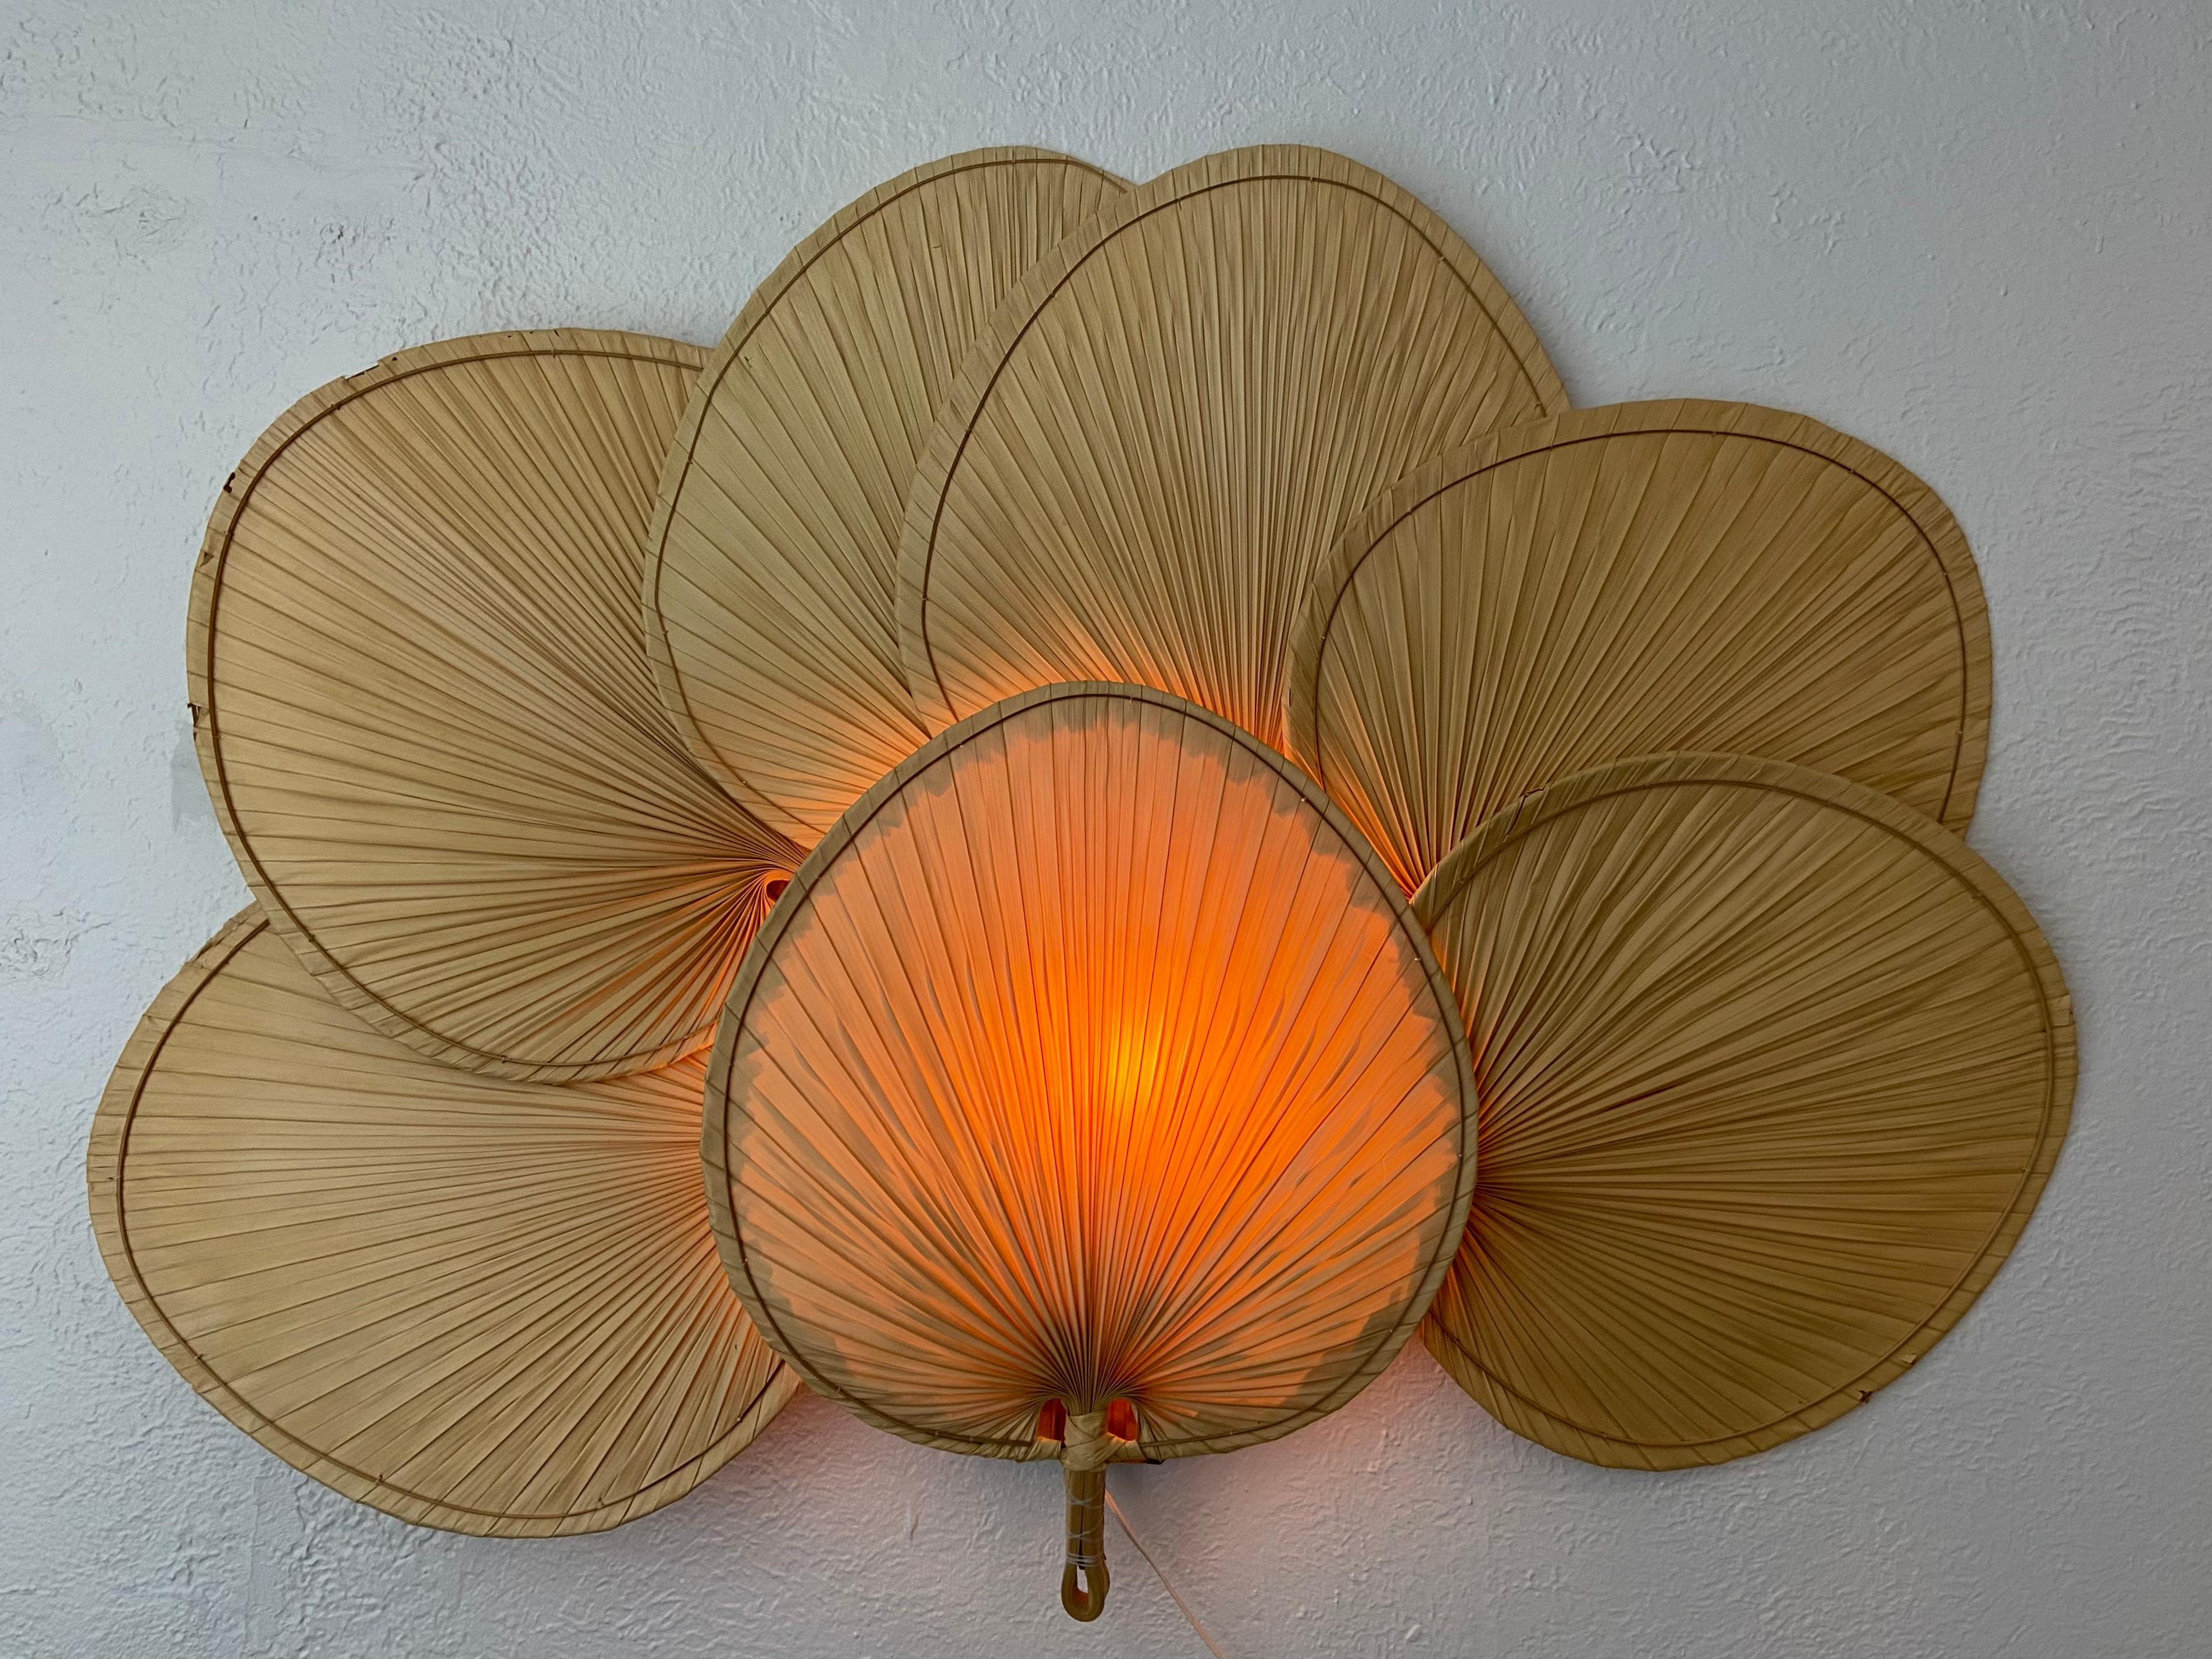 Vintage Ingo Maurer Uchiwa style wall lamp. Extremely rare example. Outer edges are tattered on some fans (please refer to photos). Original as found wiring and socket. In working order. Overall great vintage condition. 

Would work well in a